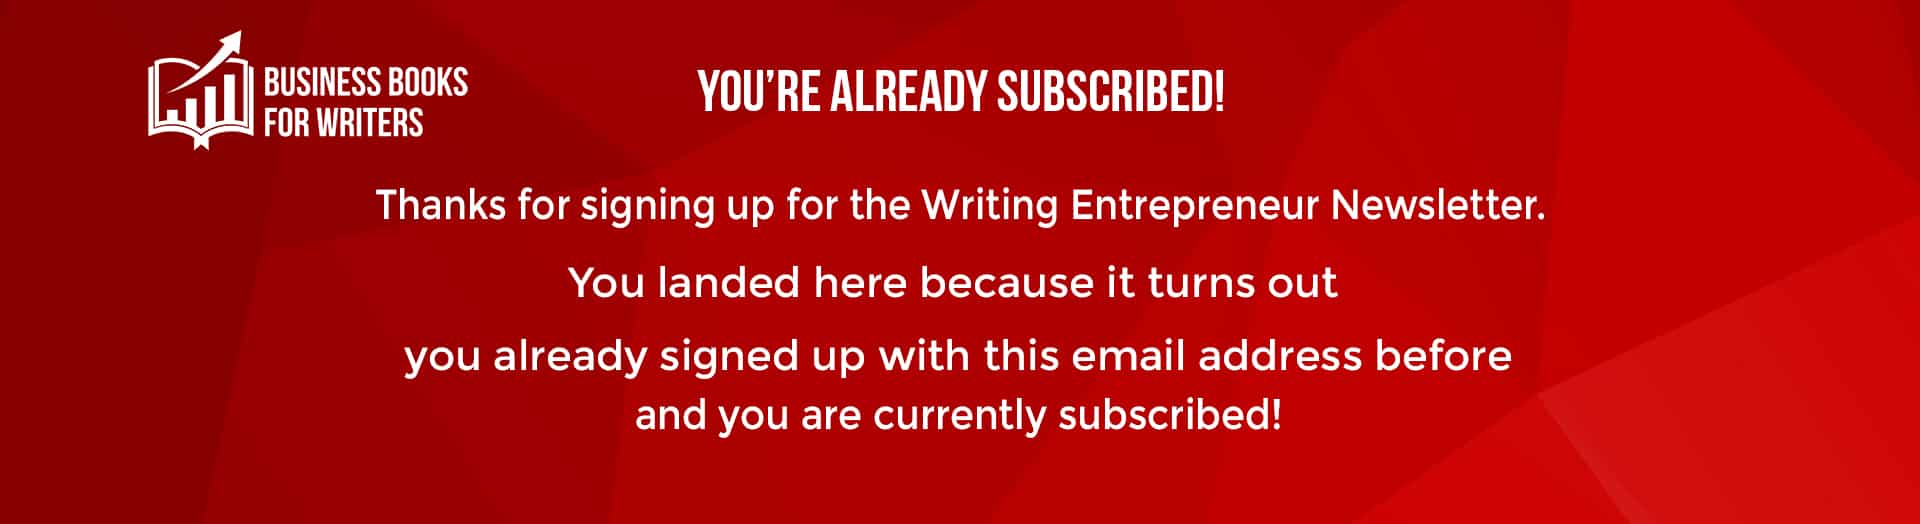 Newsletter already subscribed page